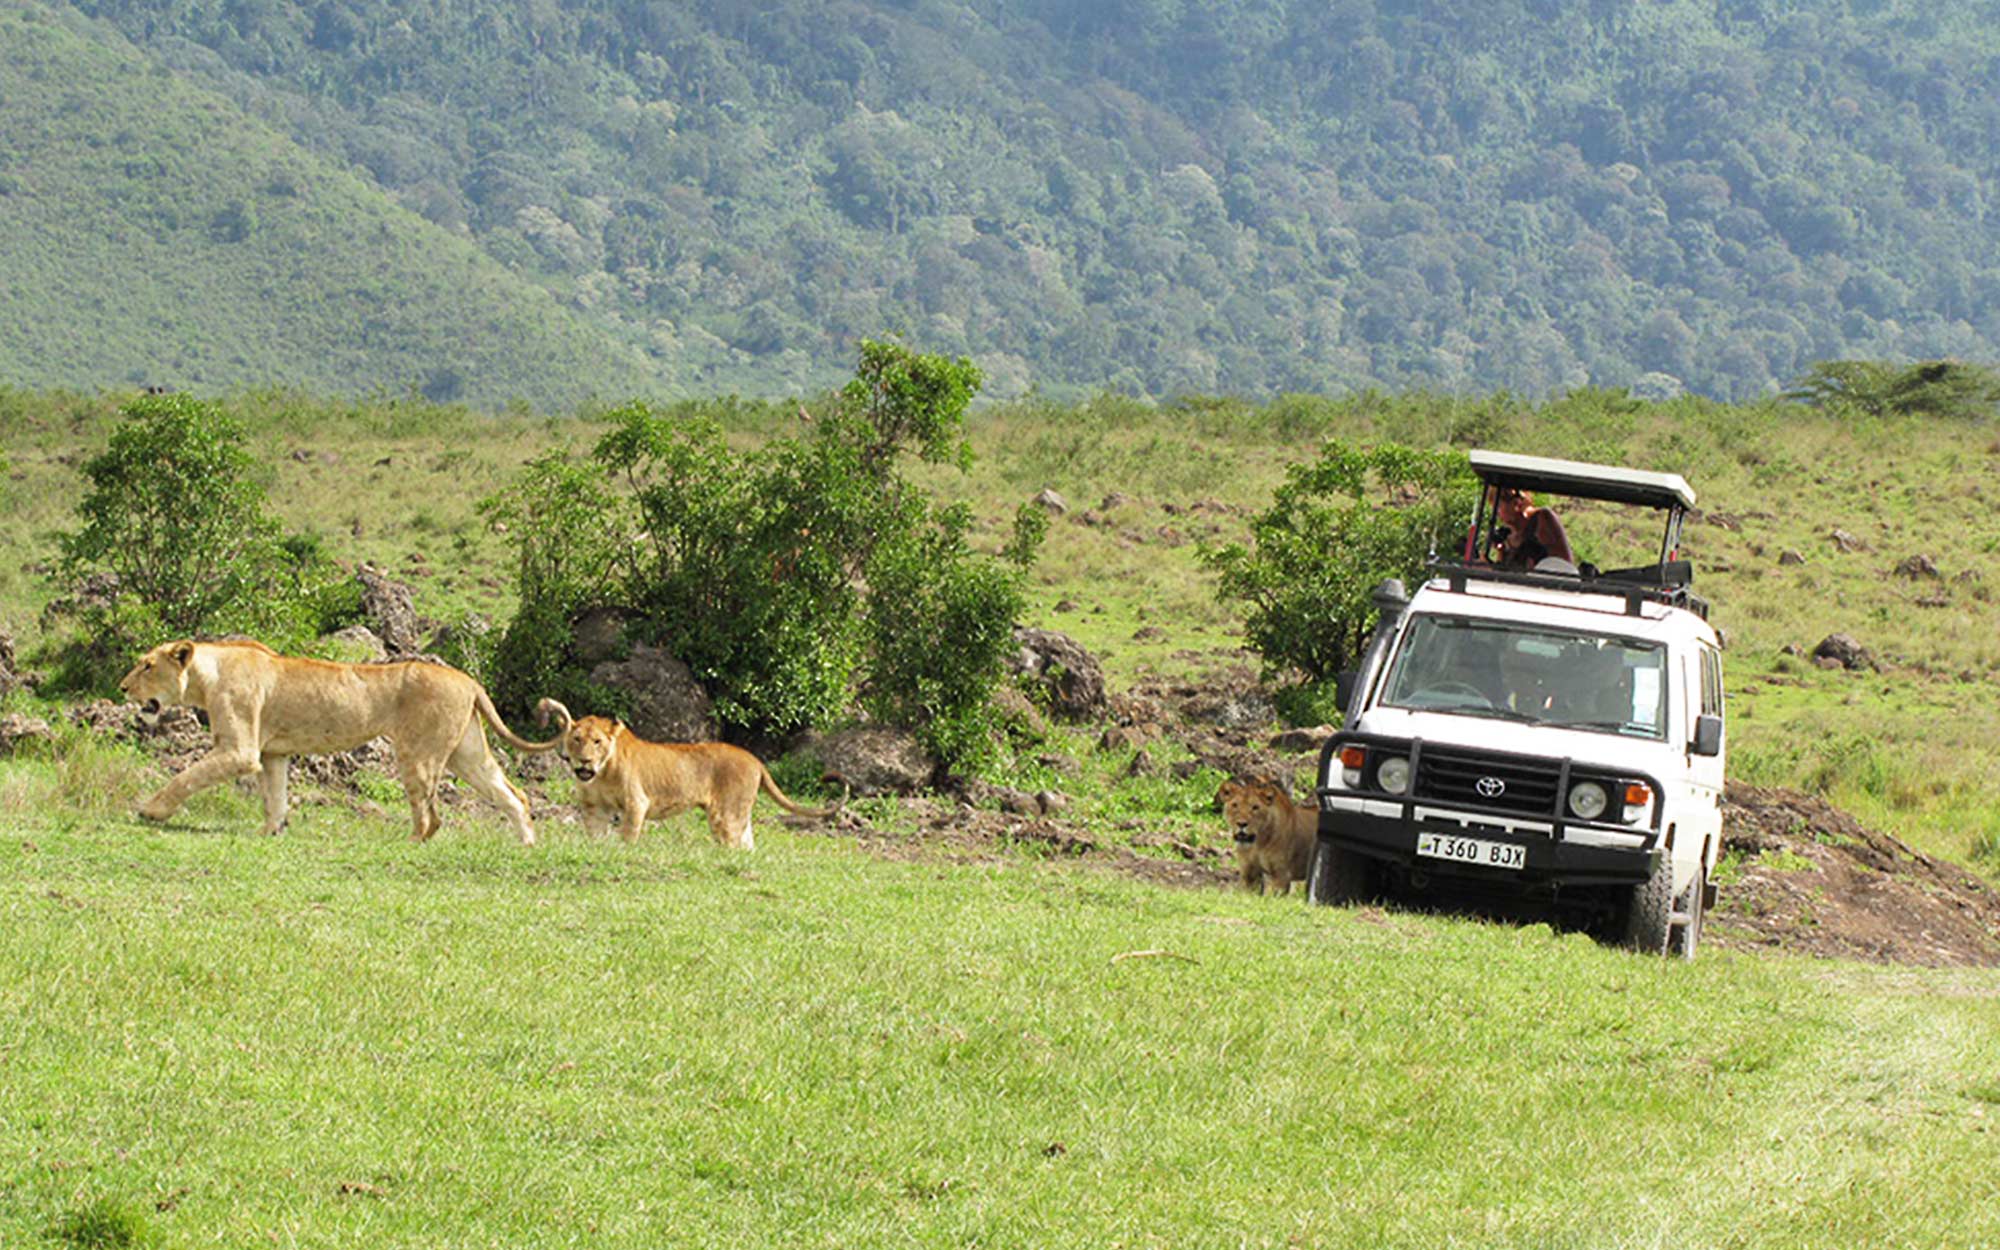 People watch lions from a safari vehicle while on a game drive